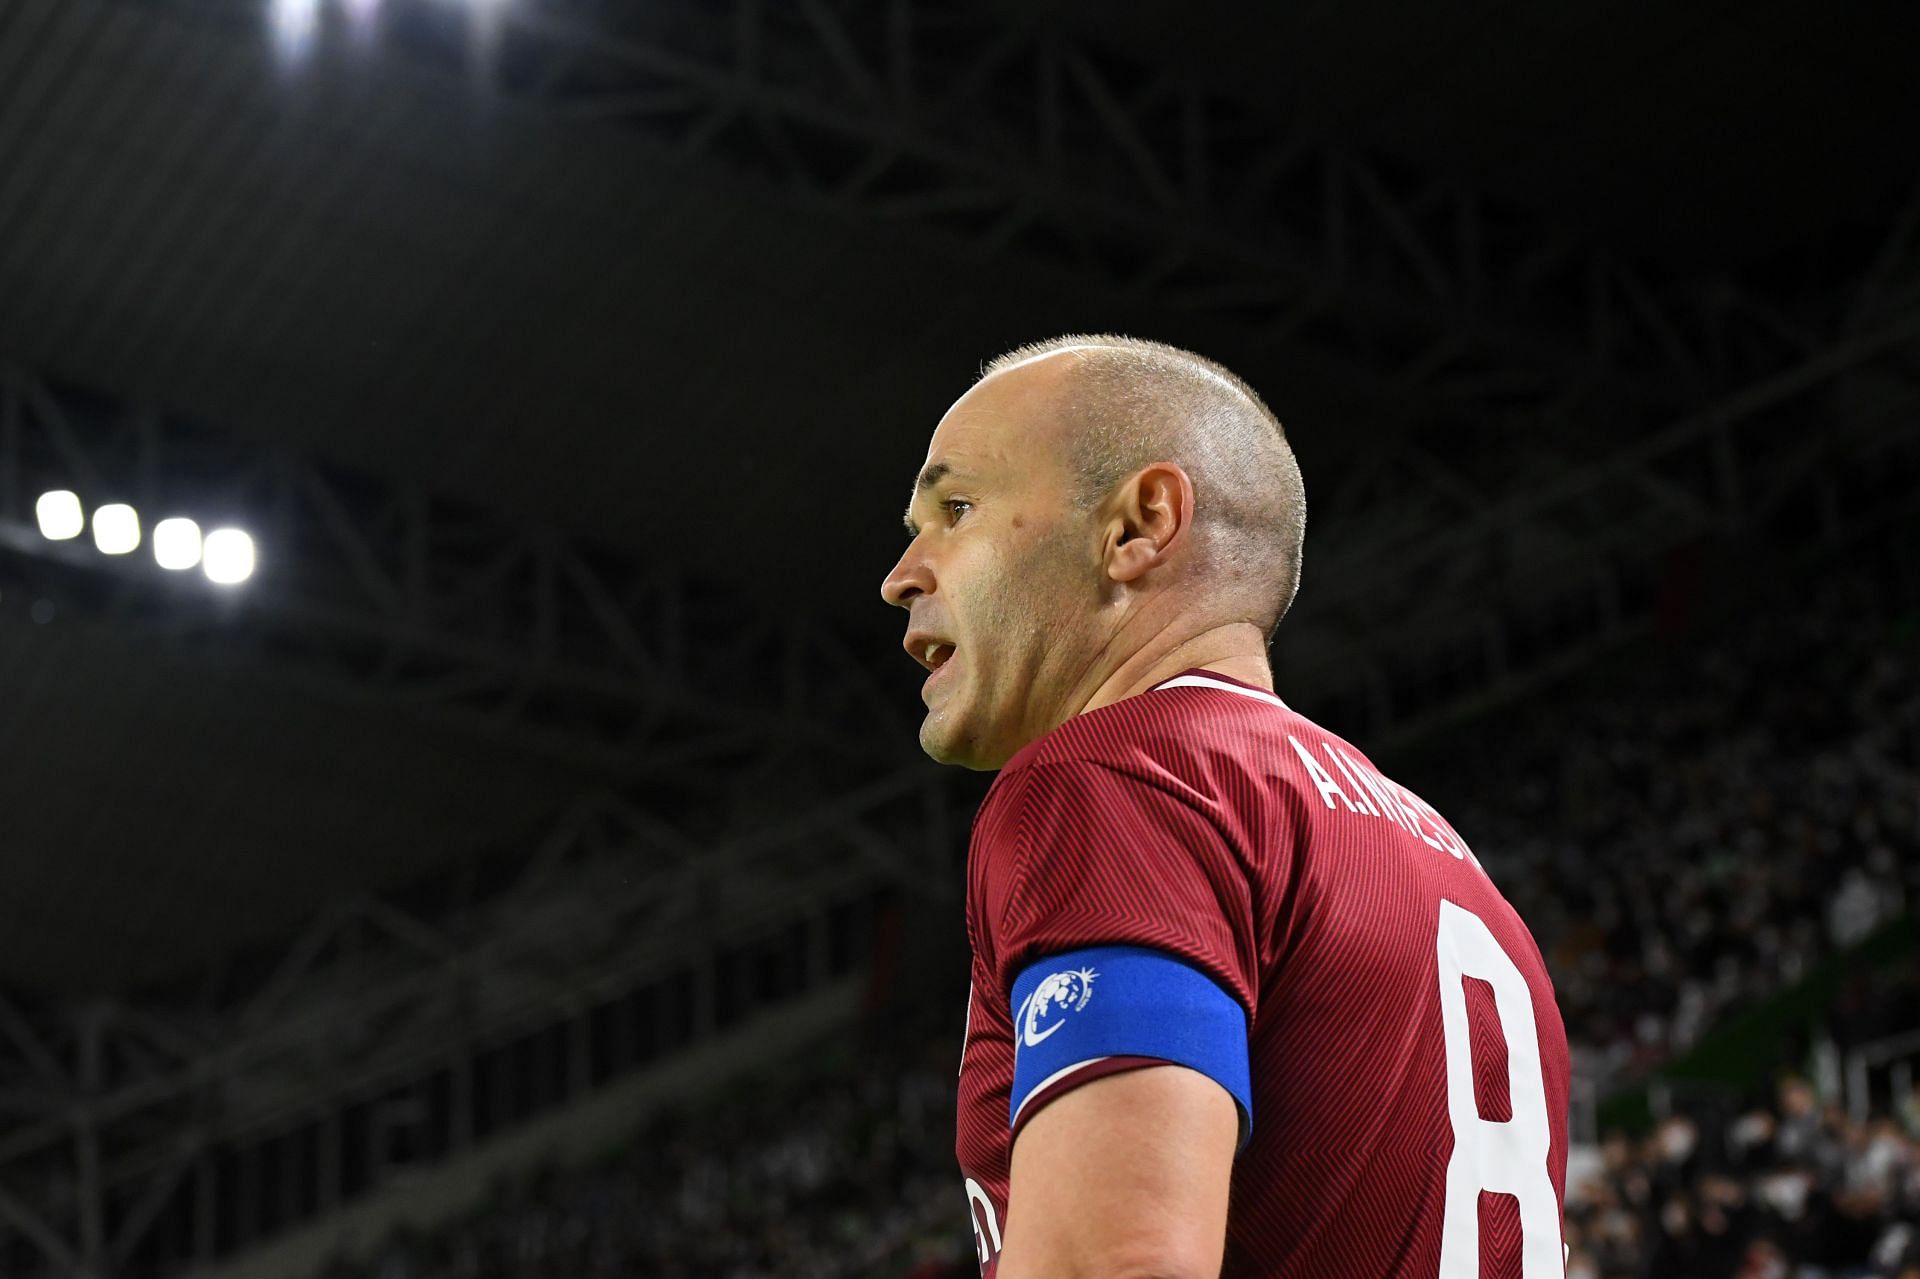 Vissel Kobe will face Kitchee SC on Tuesday - AFC Champions League